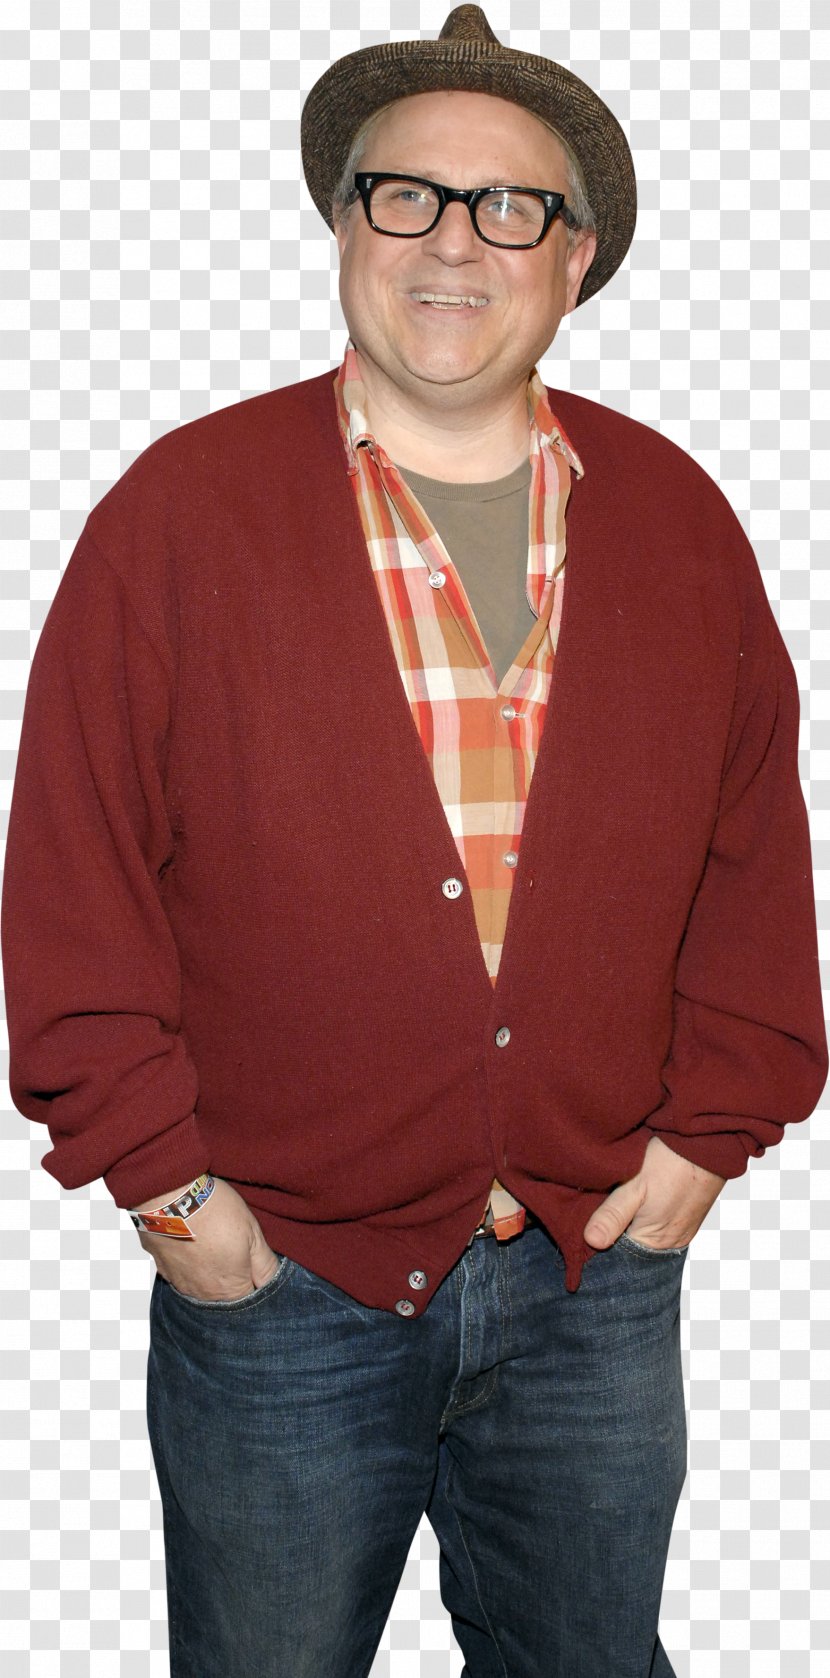 Bobcat Goldthwait The Pee-wee Herman Show Comedian - Stock Photography - Outerwear Transparent PNG